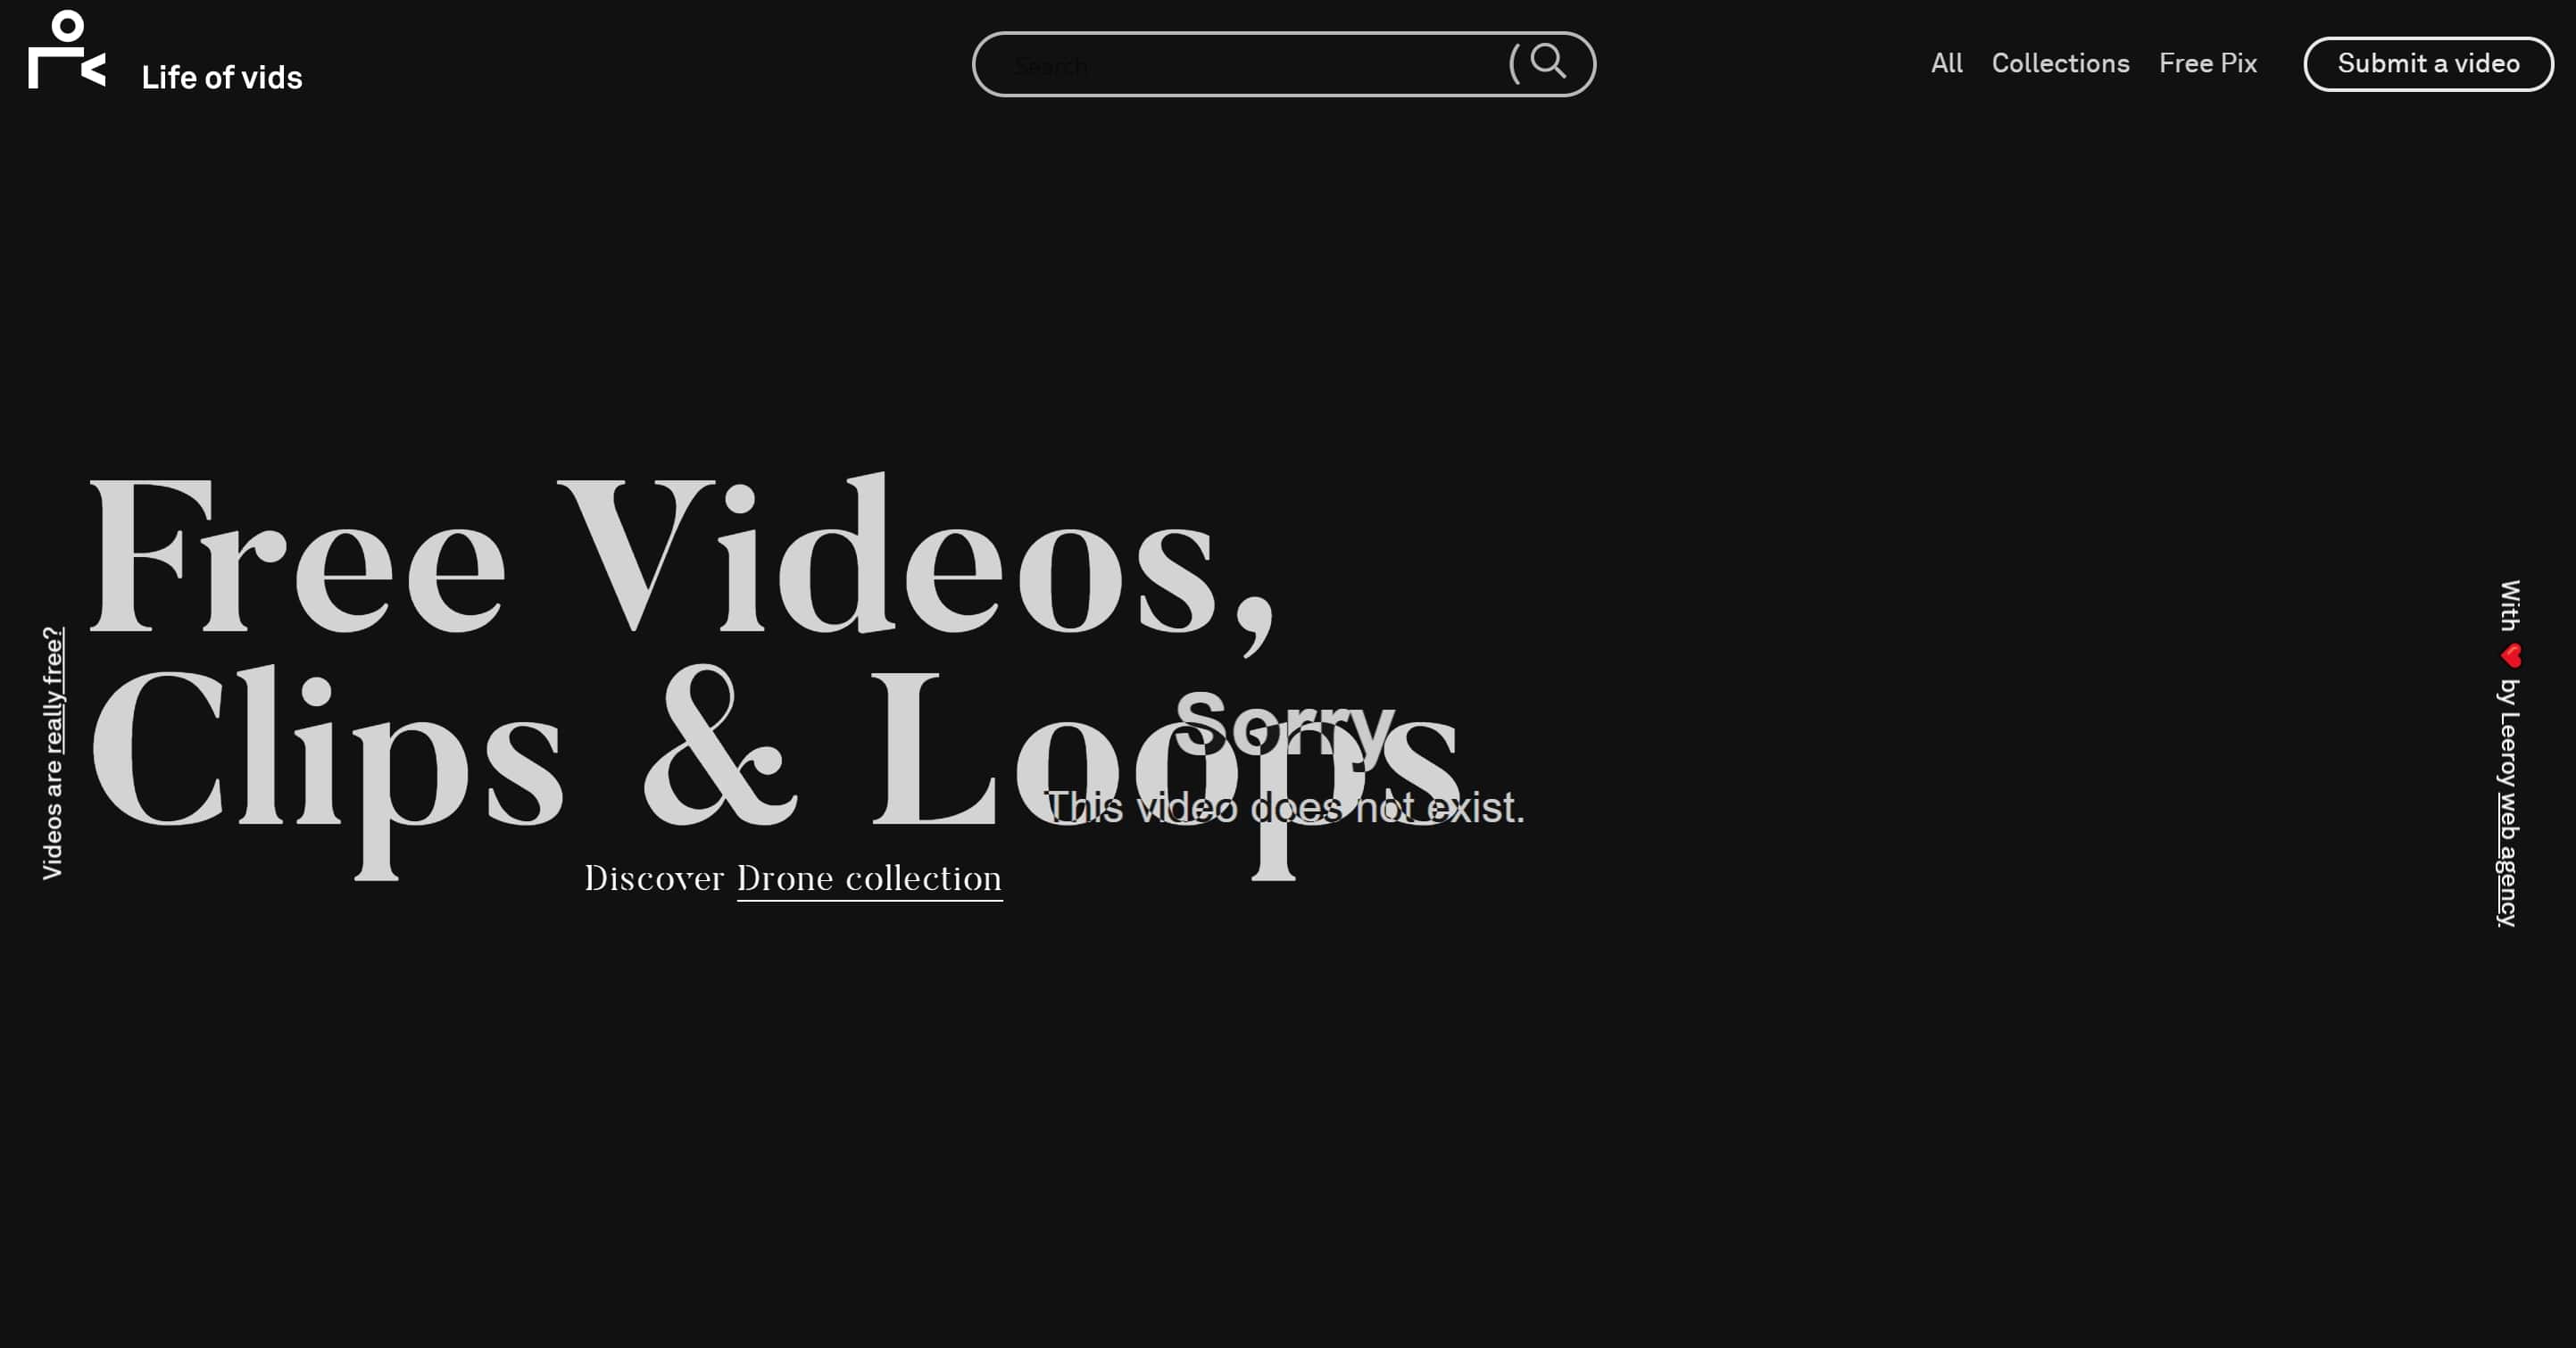 life of vids free stock video download site